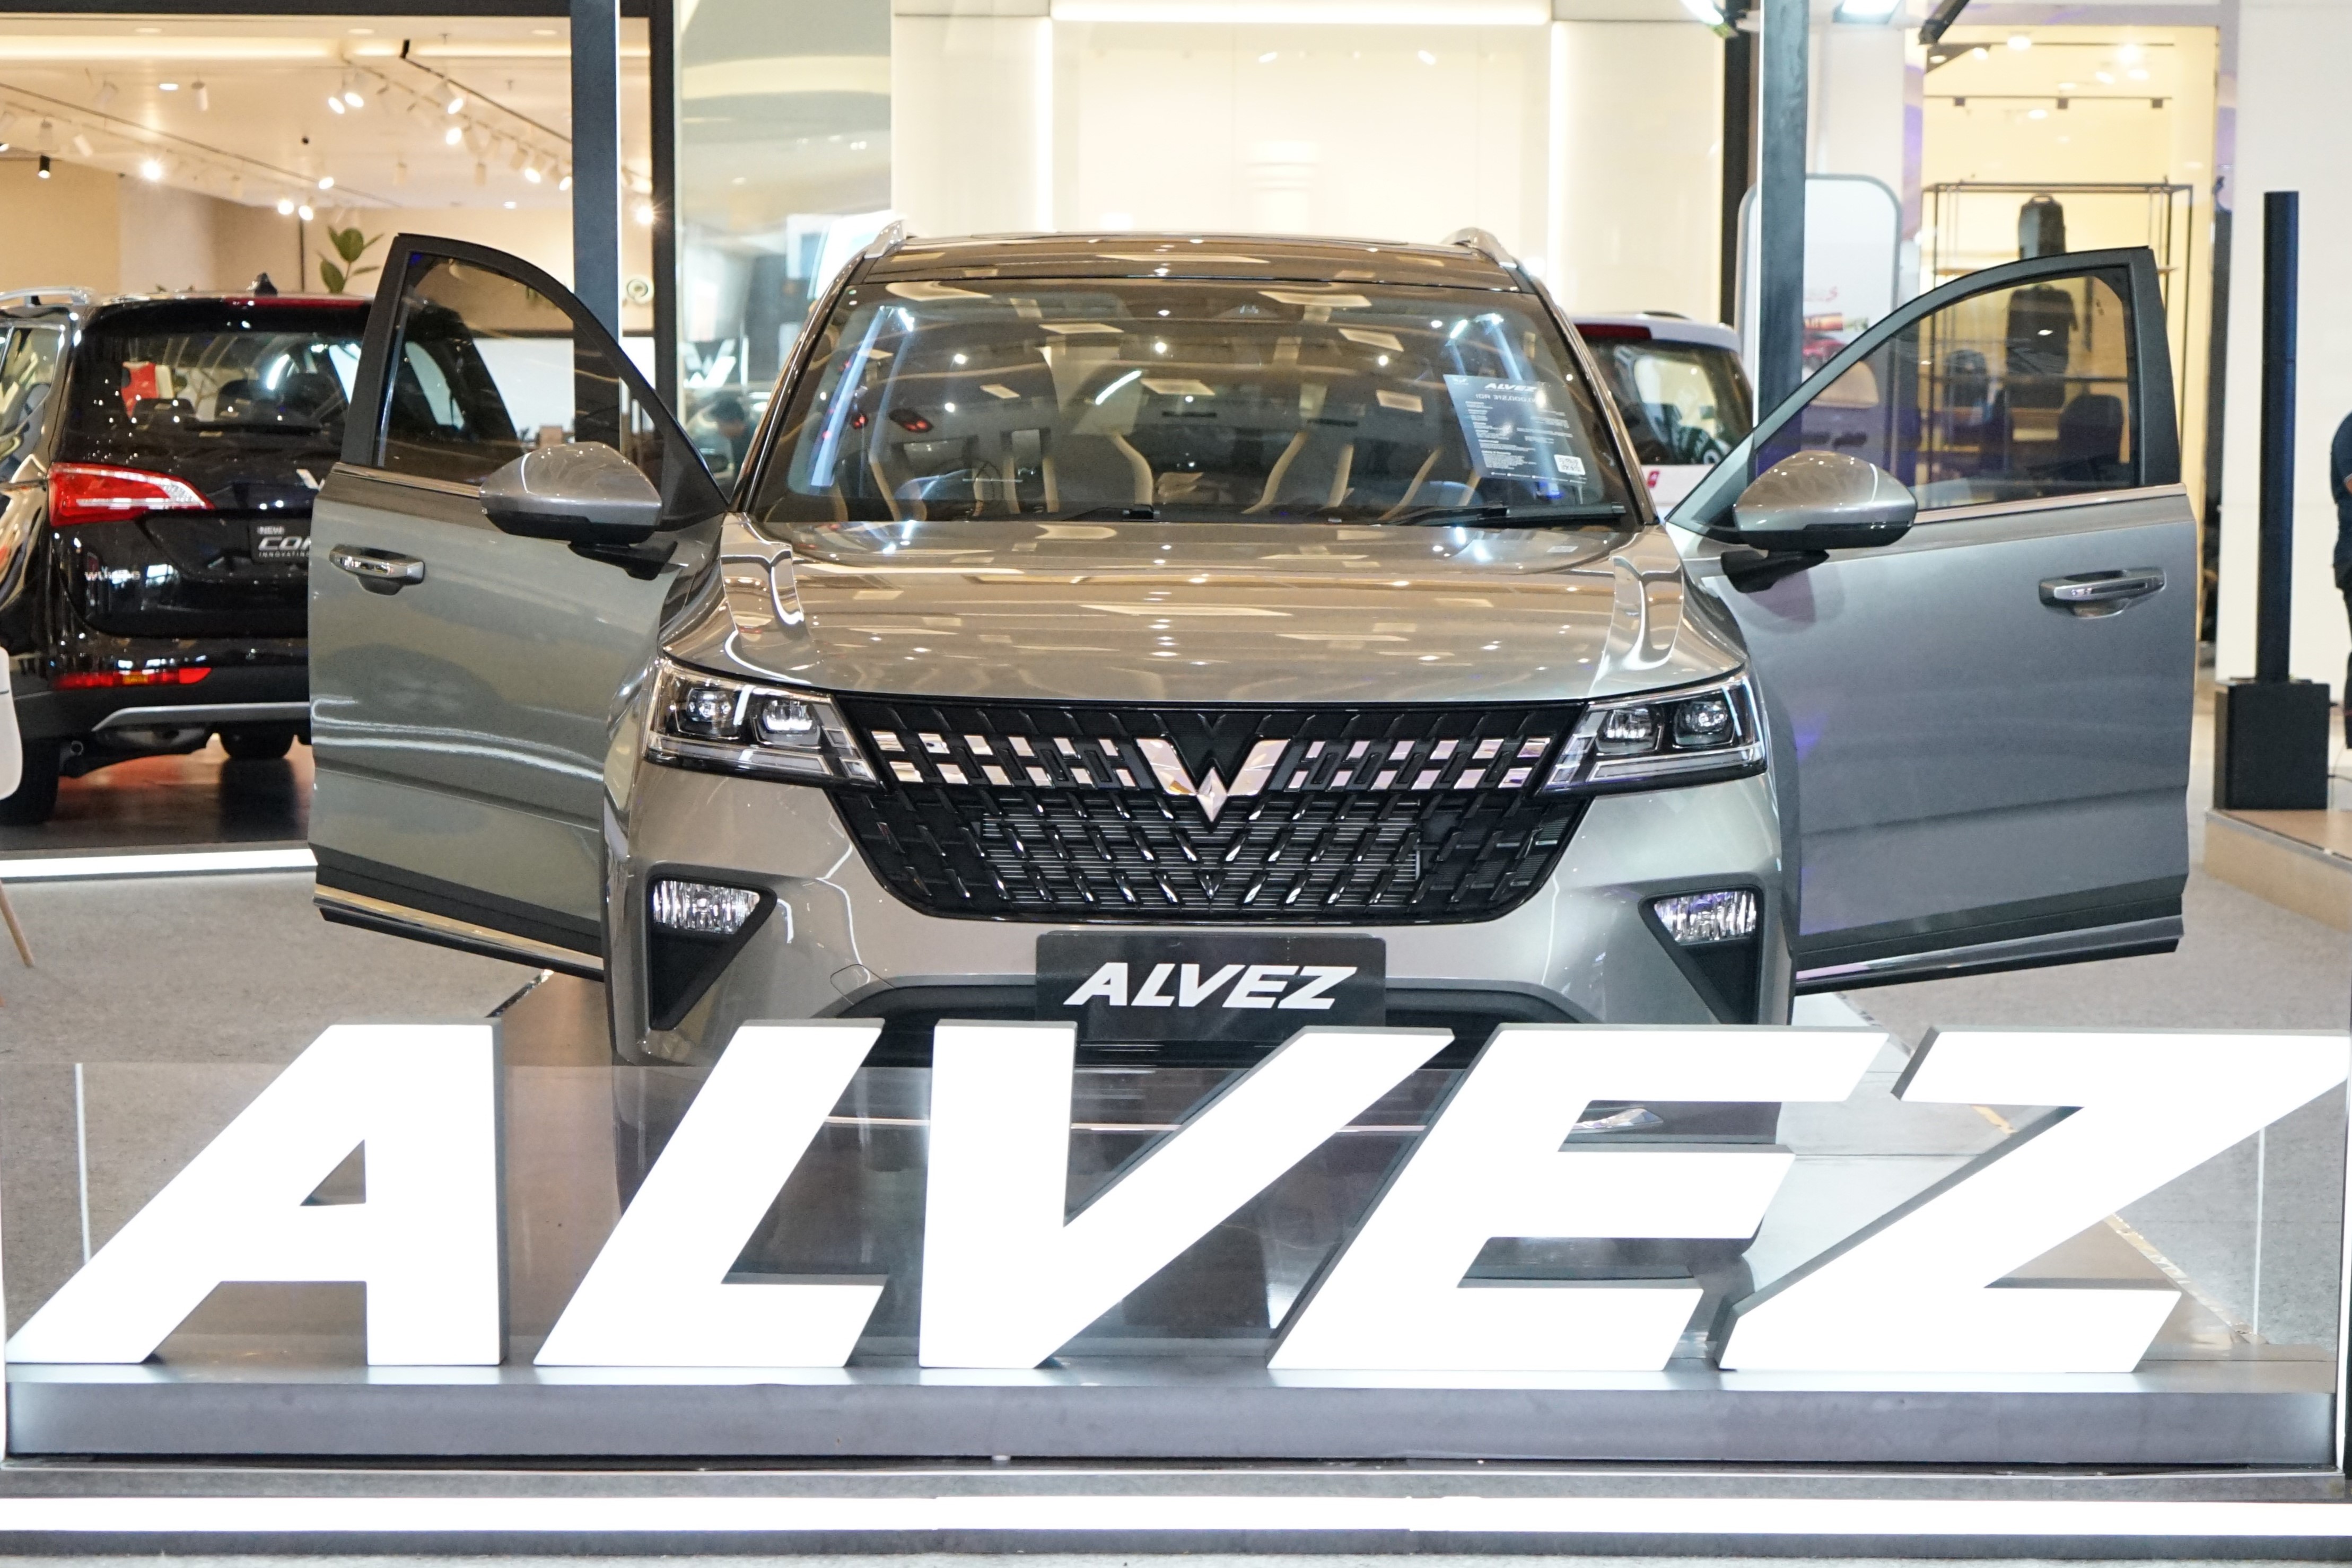 Image Wuling Officially Launches Alvez, ‘Style and Innovation in One SUV’ in Medan